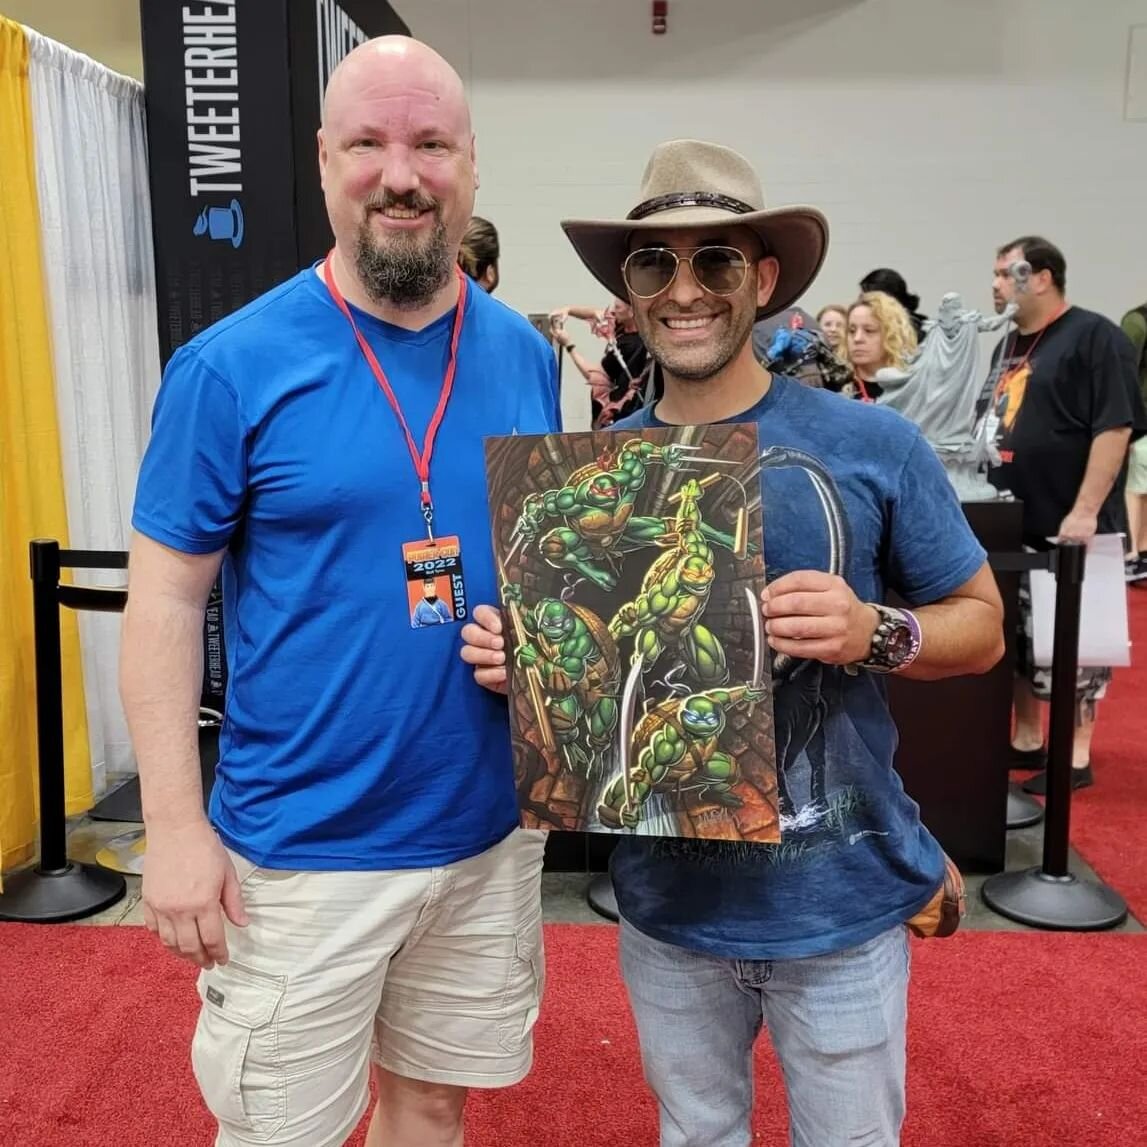 Coyote Peterson and Mario in the house at @thepowercon @coyotepeterson So cool to meet them! I watch Brave Wilderness all the time! @bravewilderness